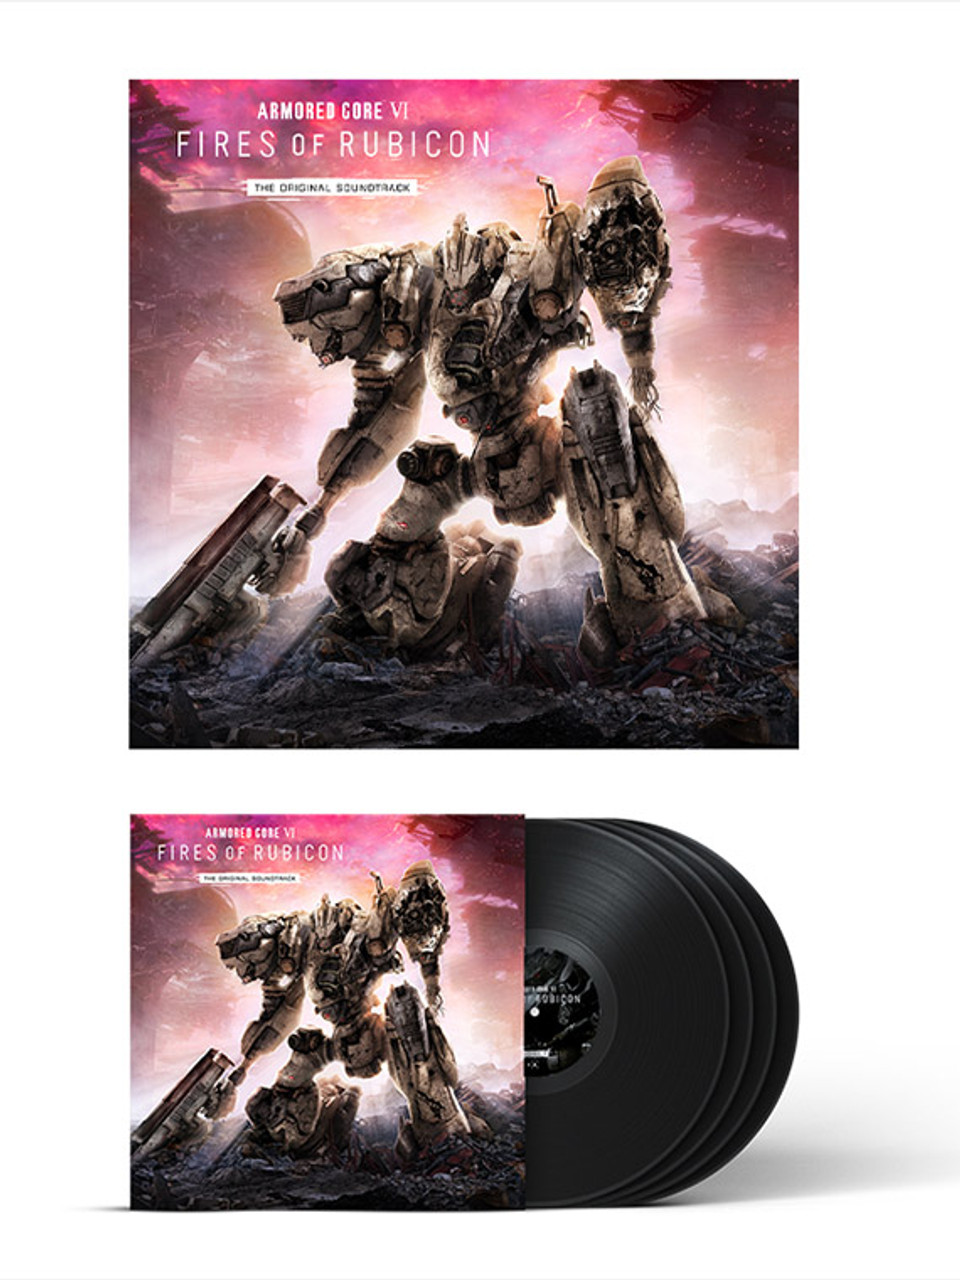 ARMORED CORE VI FIRES OF RUBICON - OFFICIAL VINYL